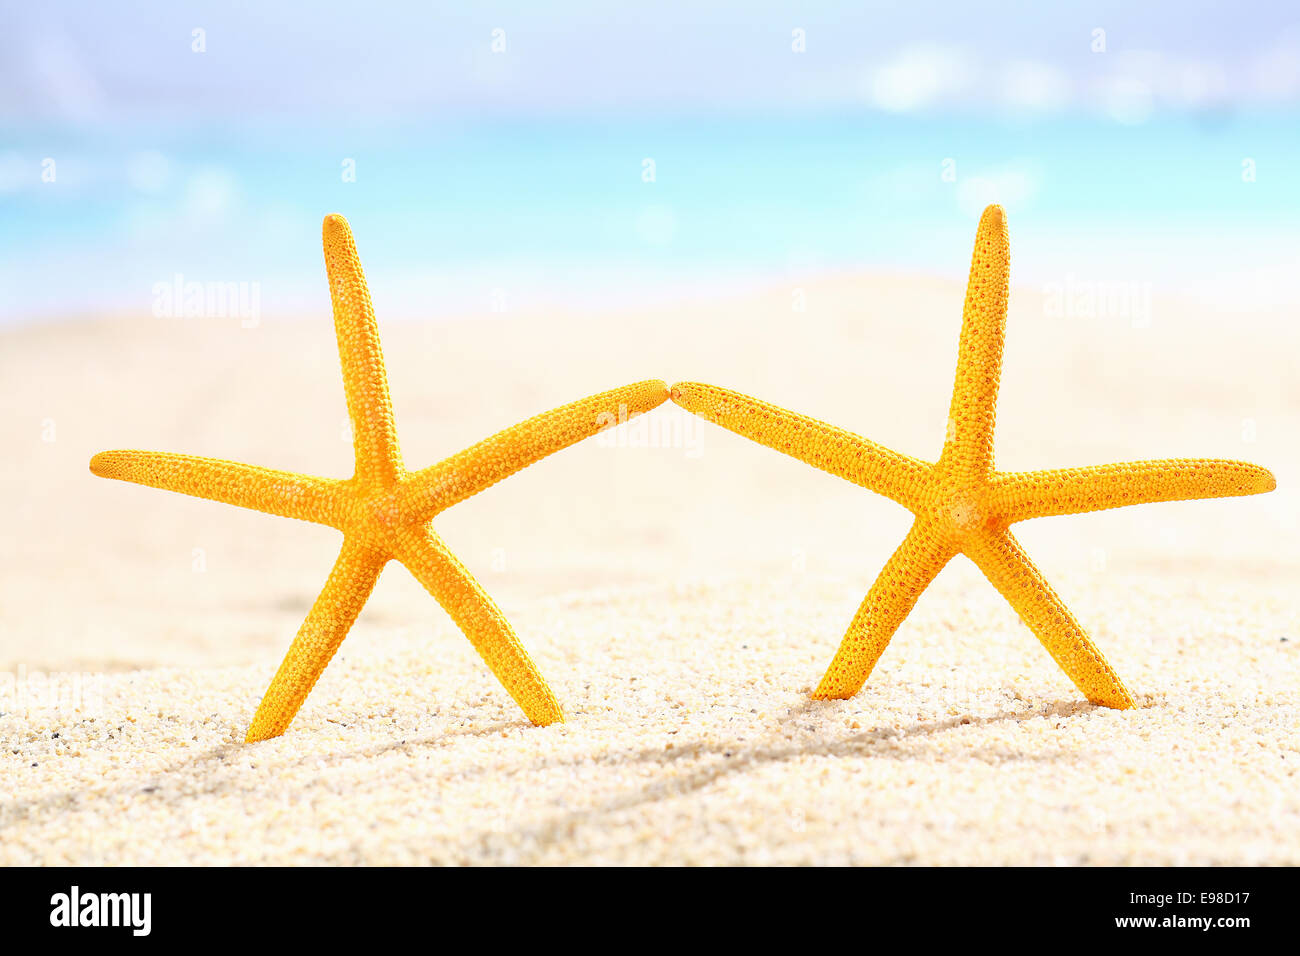 Couple of starfish on the beach standing upright in the sand as though holding hands on a summer vacation Stock Photo